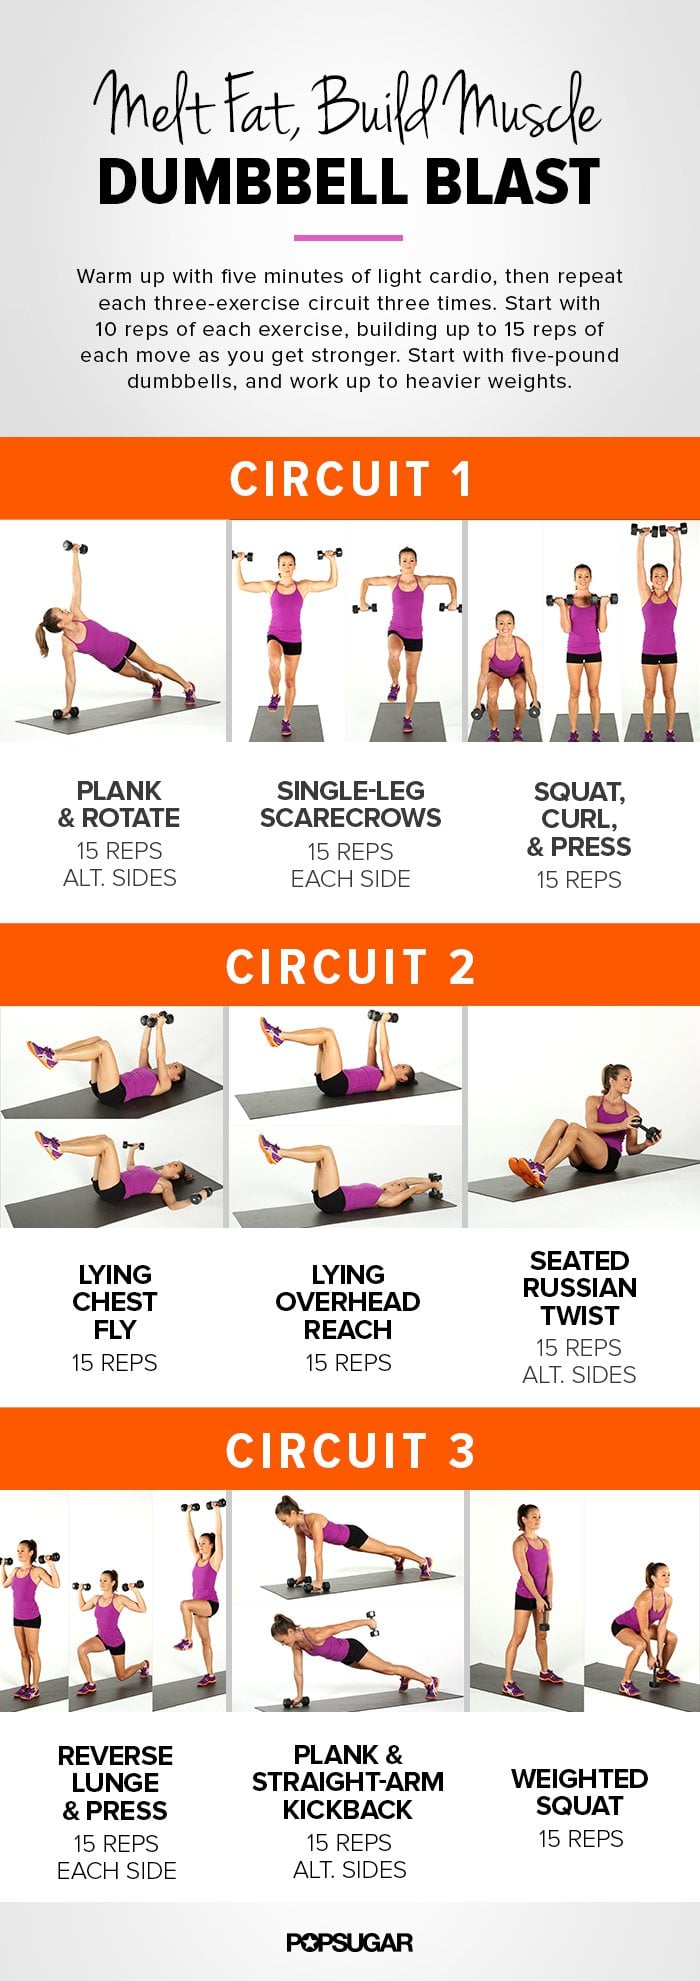 Print This Now! Full-Body Circuit With Weights  Full body circuit workout, Circuit  workout, Fitness body